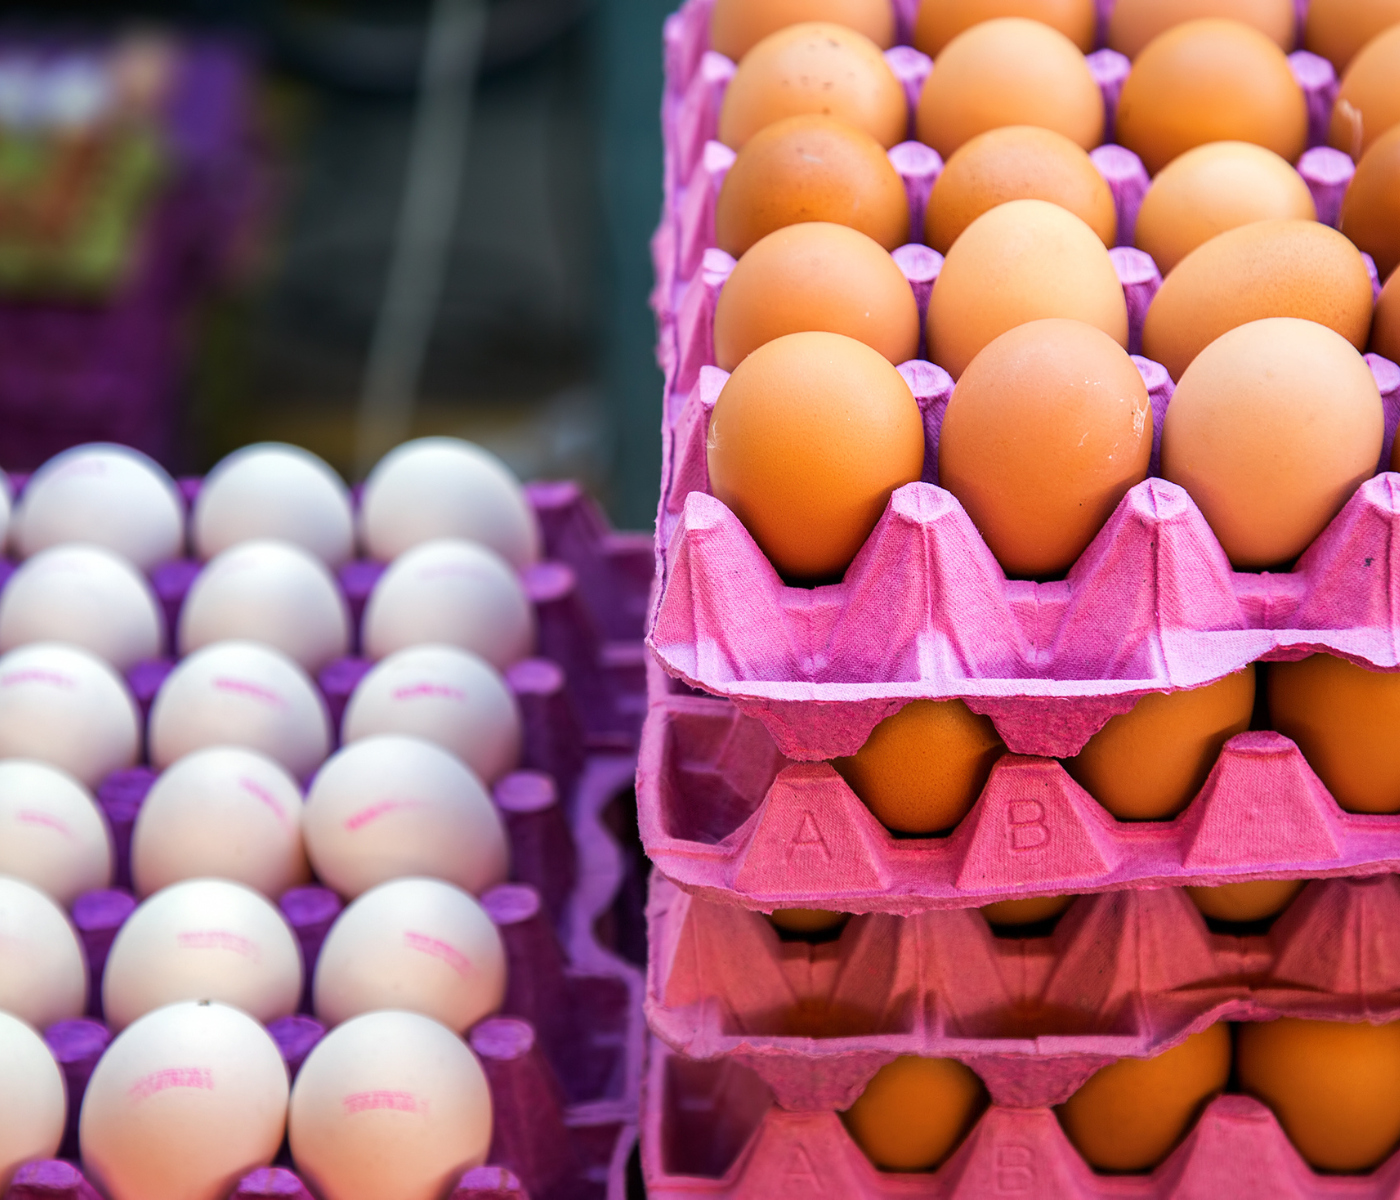 Egg prices on the rise: the effects of animal diseases